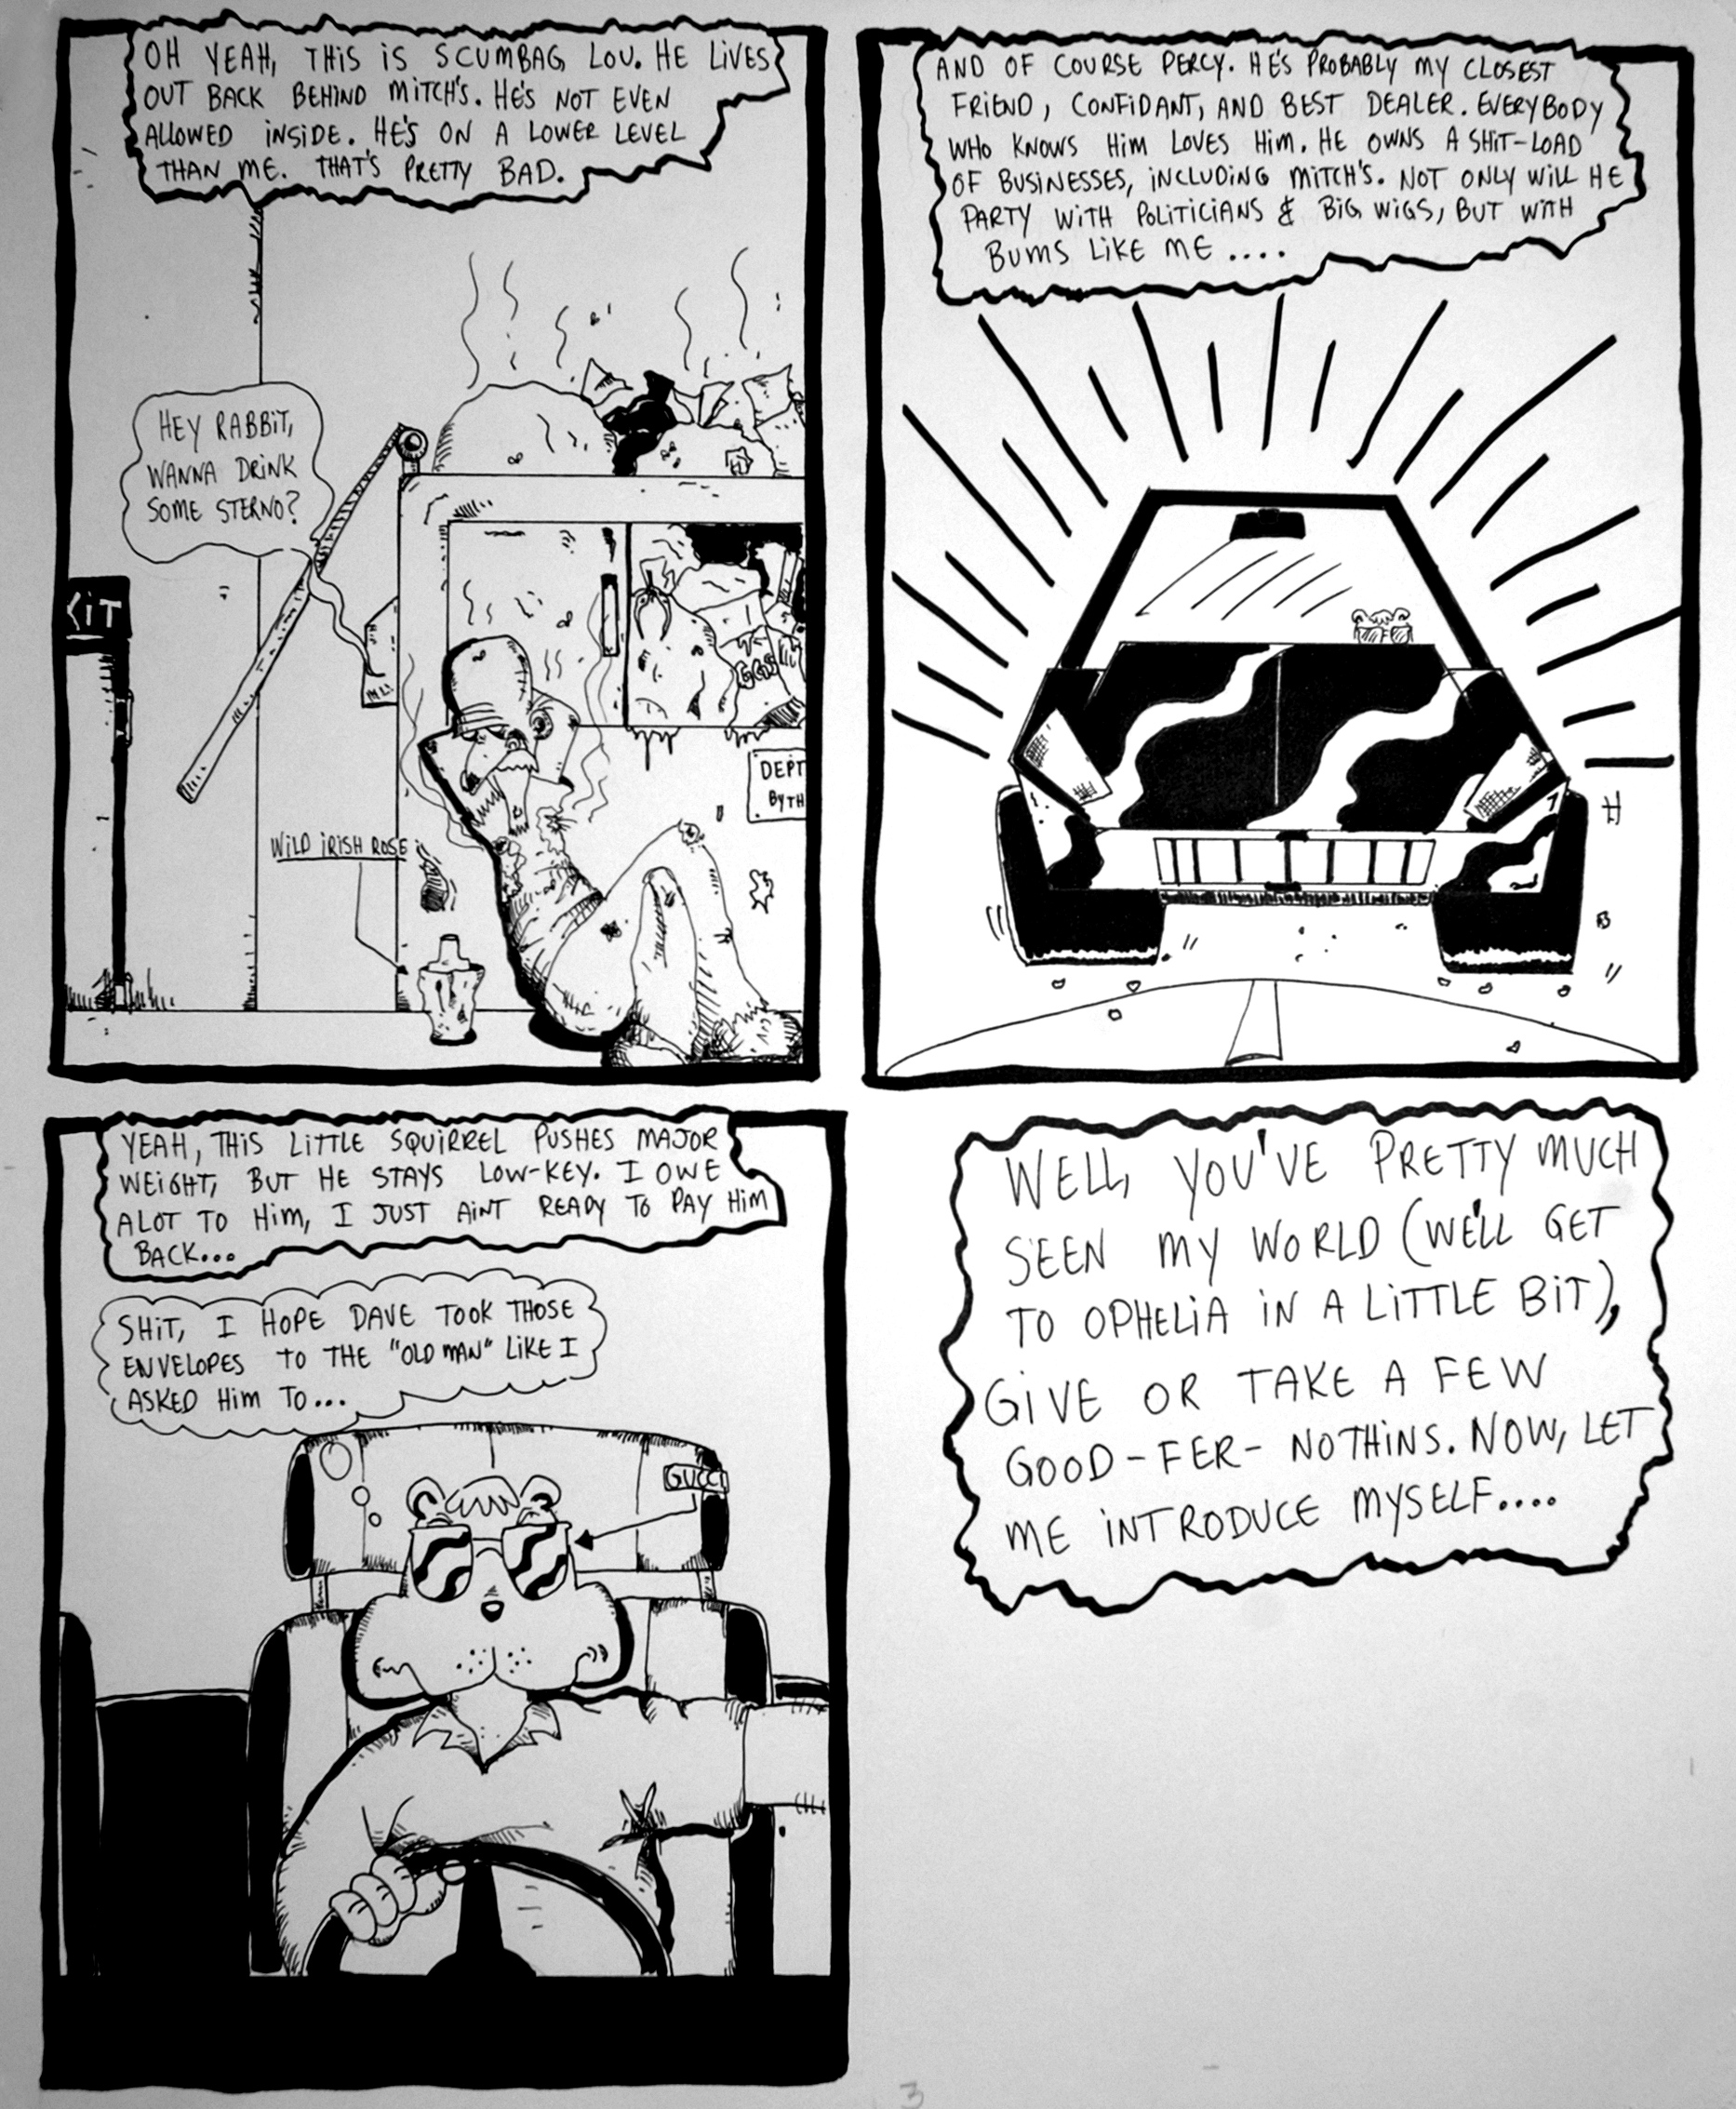 Page three, issue one.